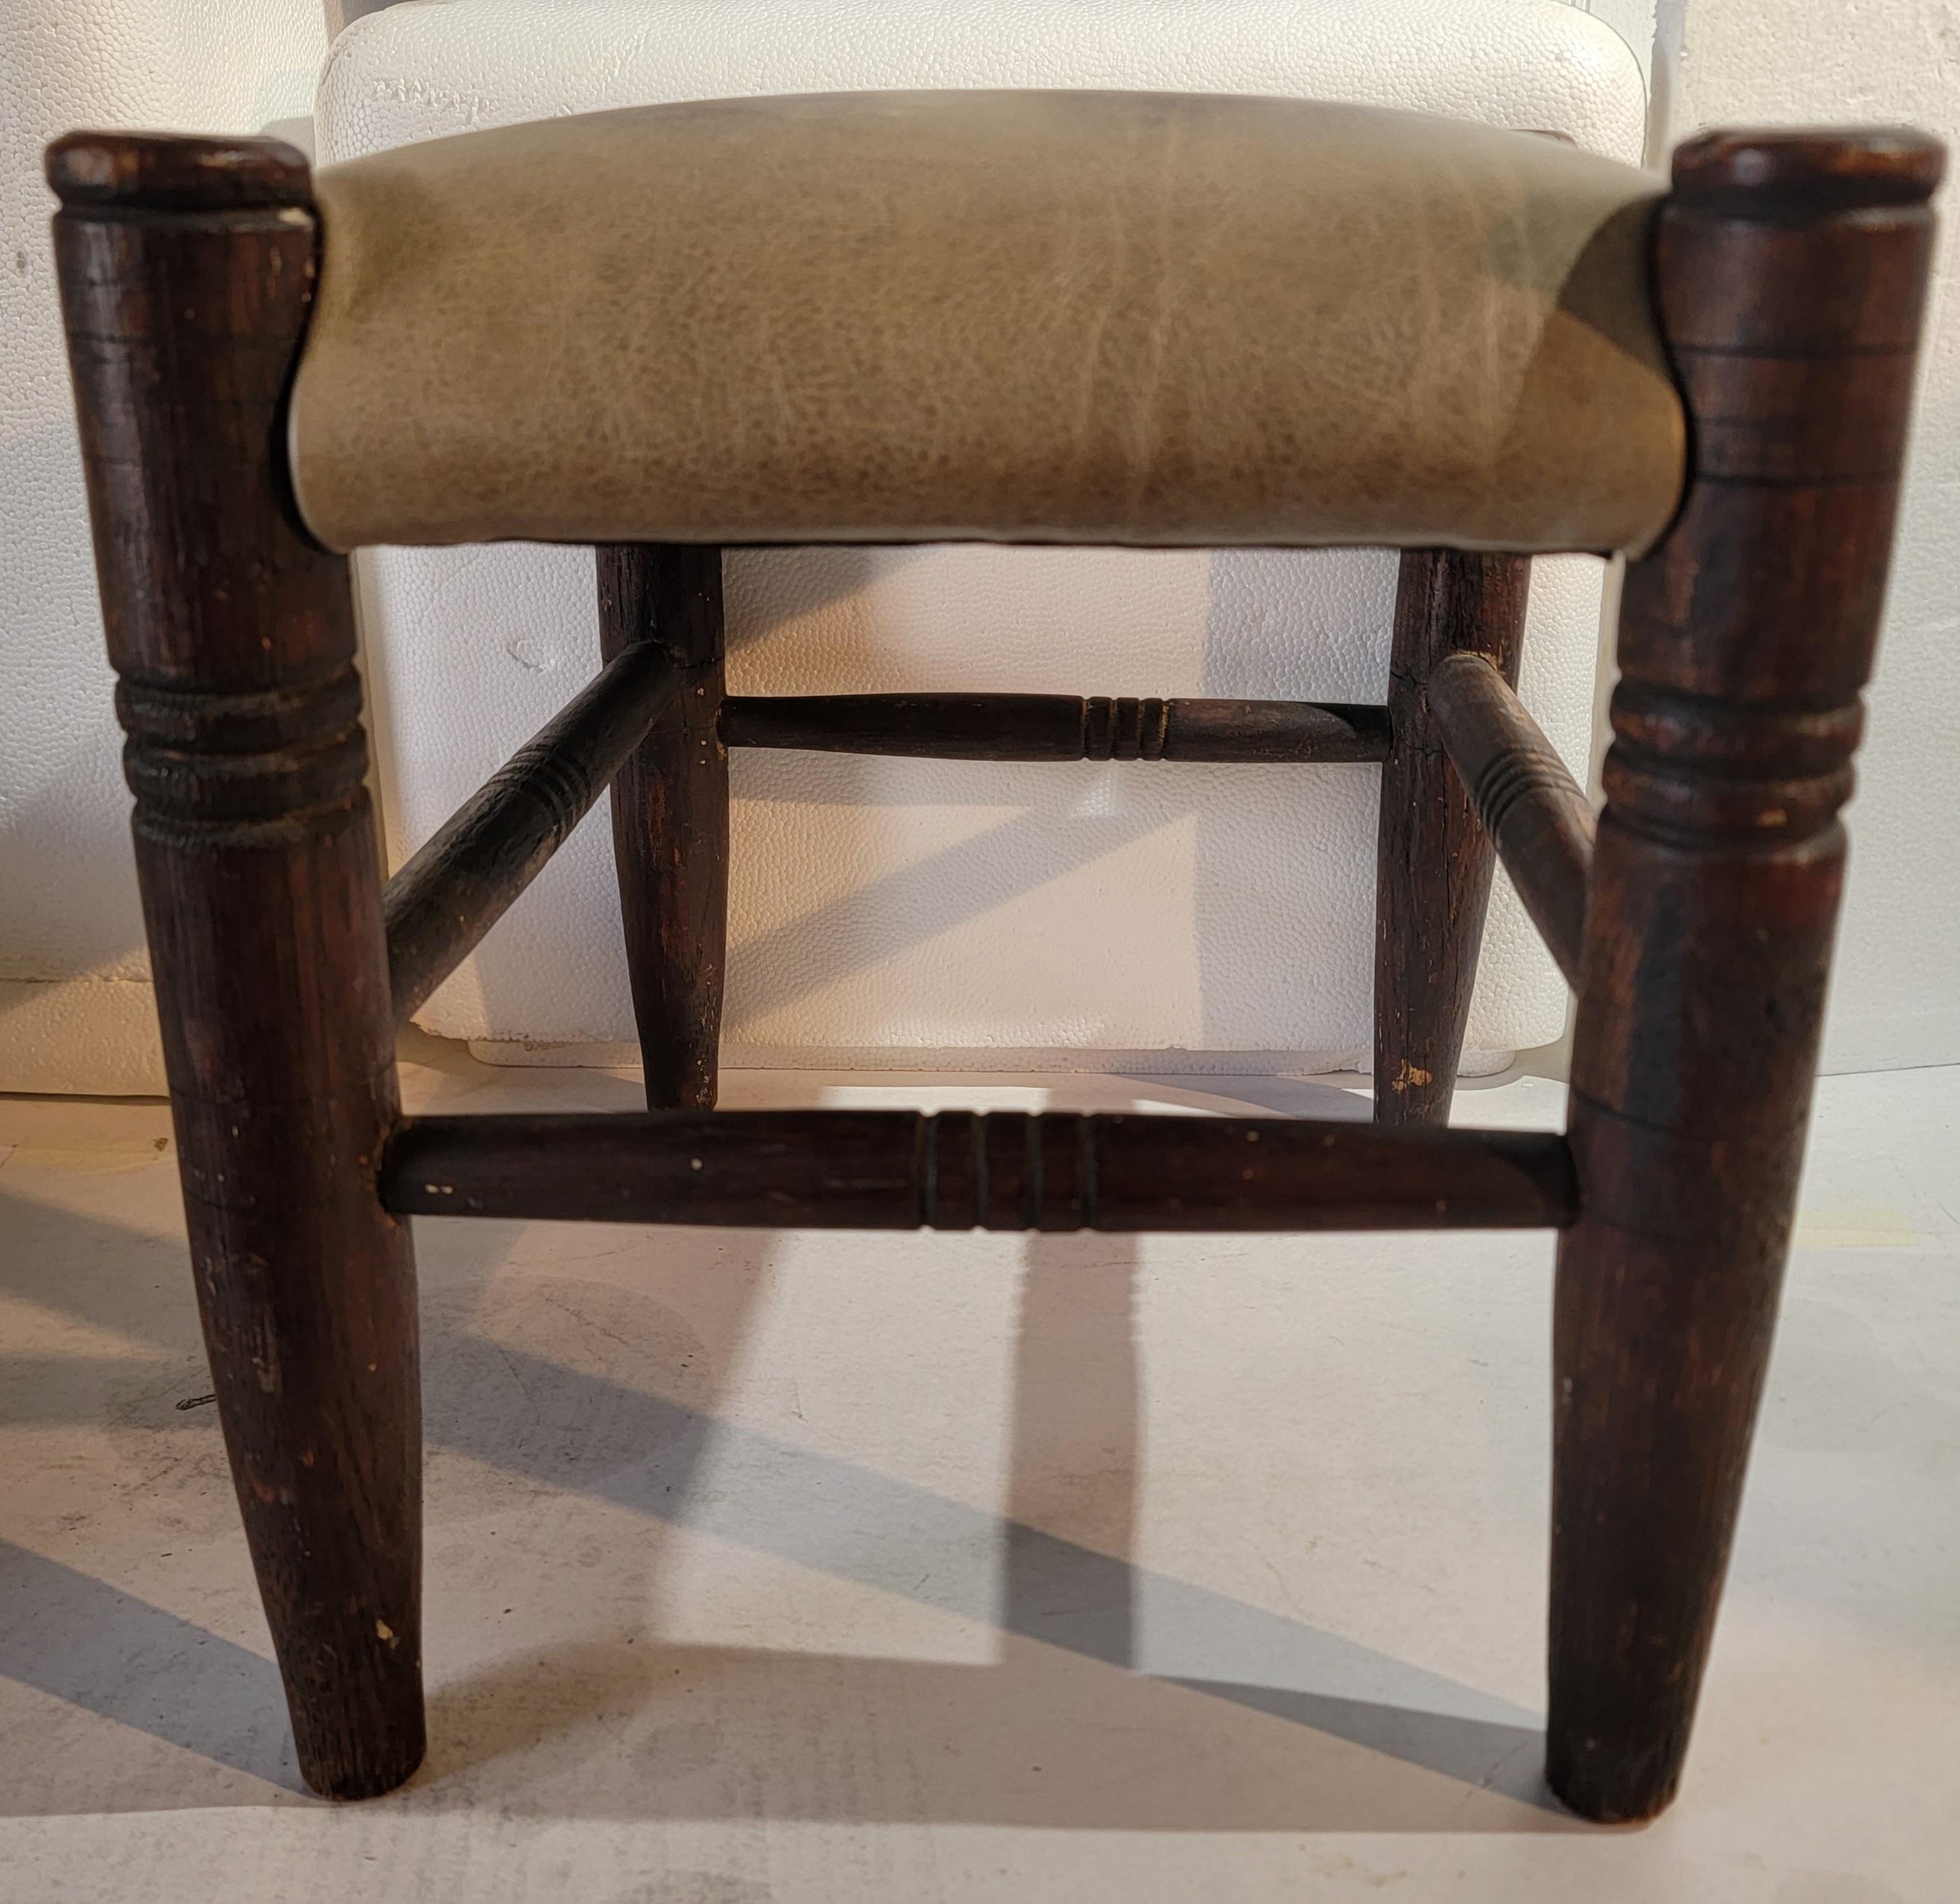 This early 19thc turned leg early stool is in sturdy condition.The top is in a newly upholstered leather.